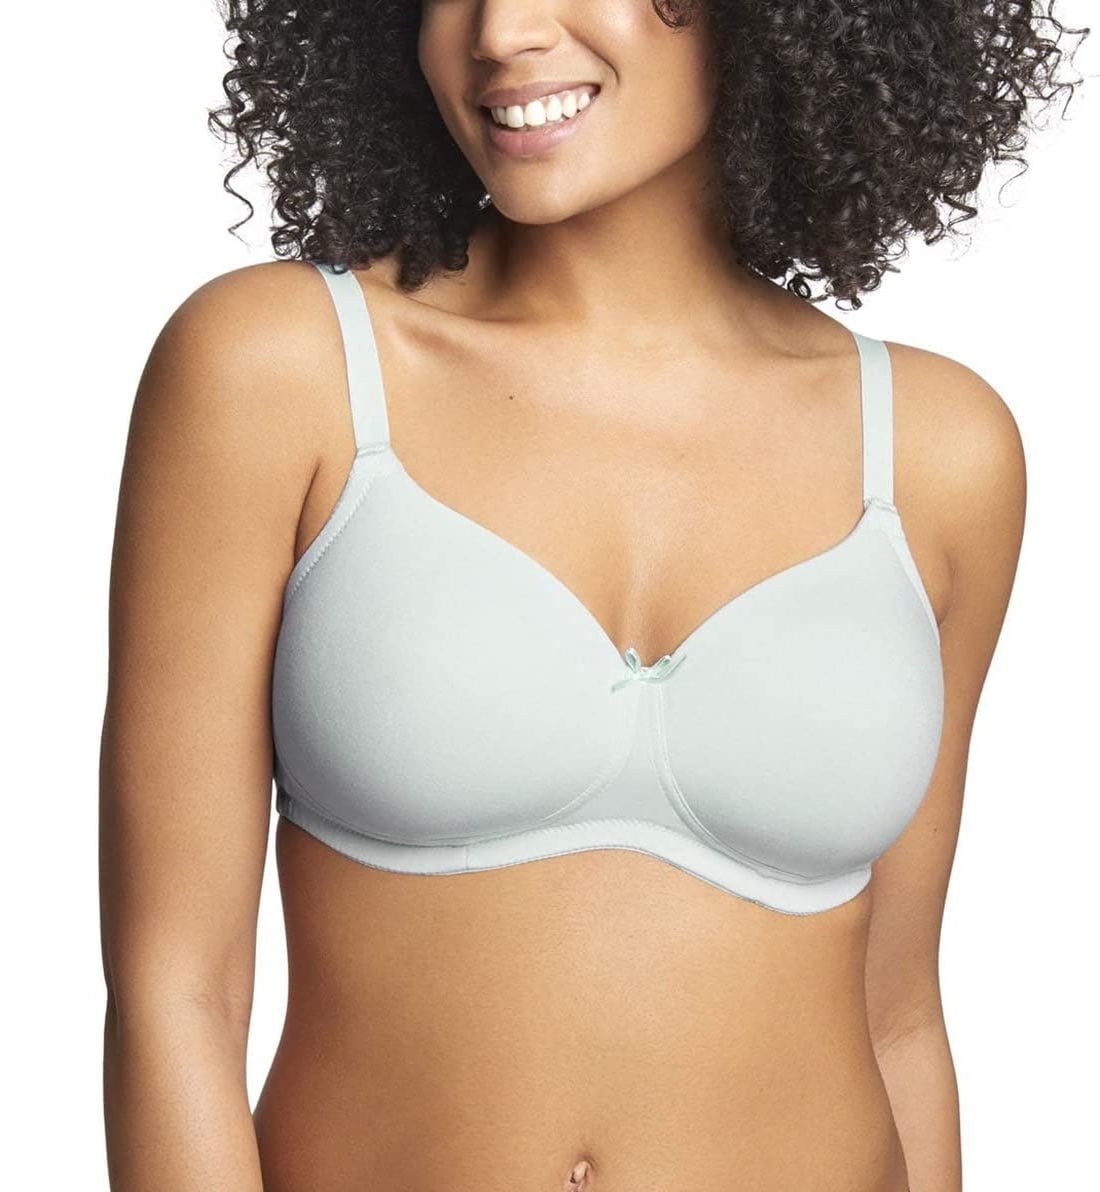 T-Shirt Bras Large & Small Cup Sizes Online – Tagged size-28d–